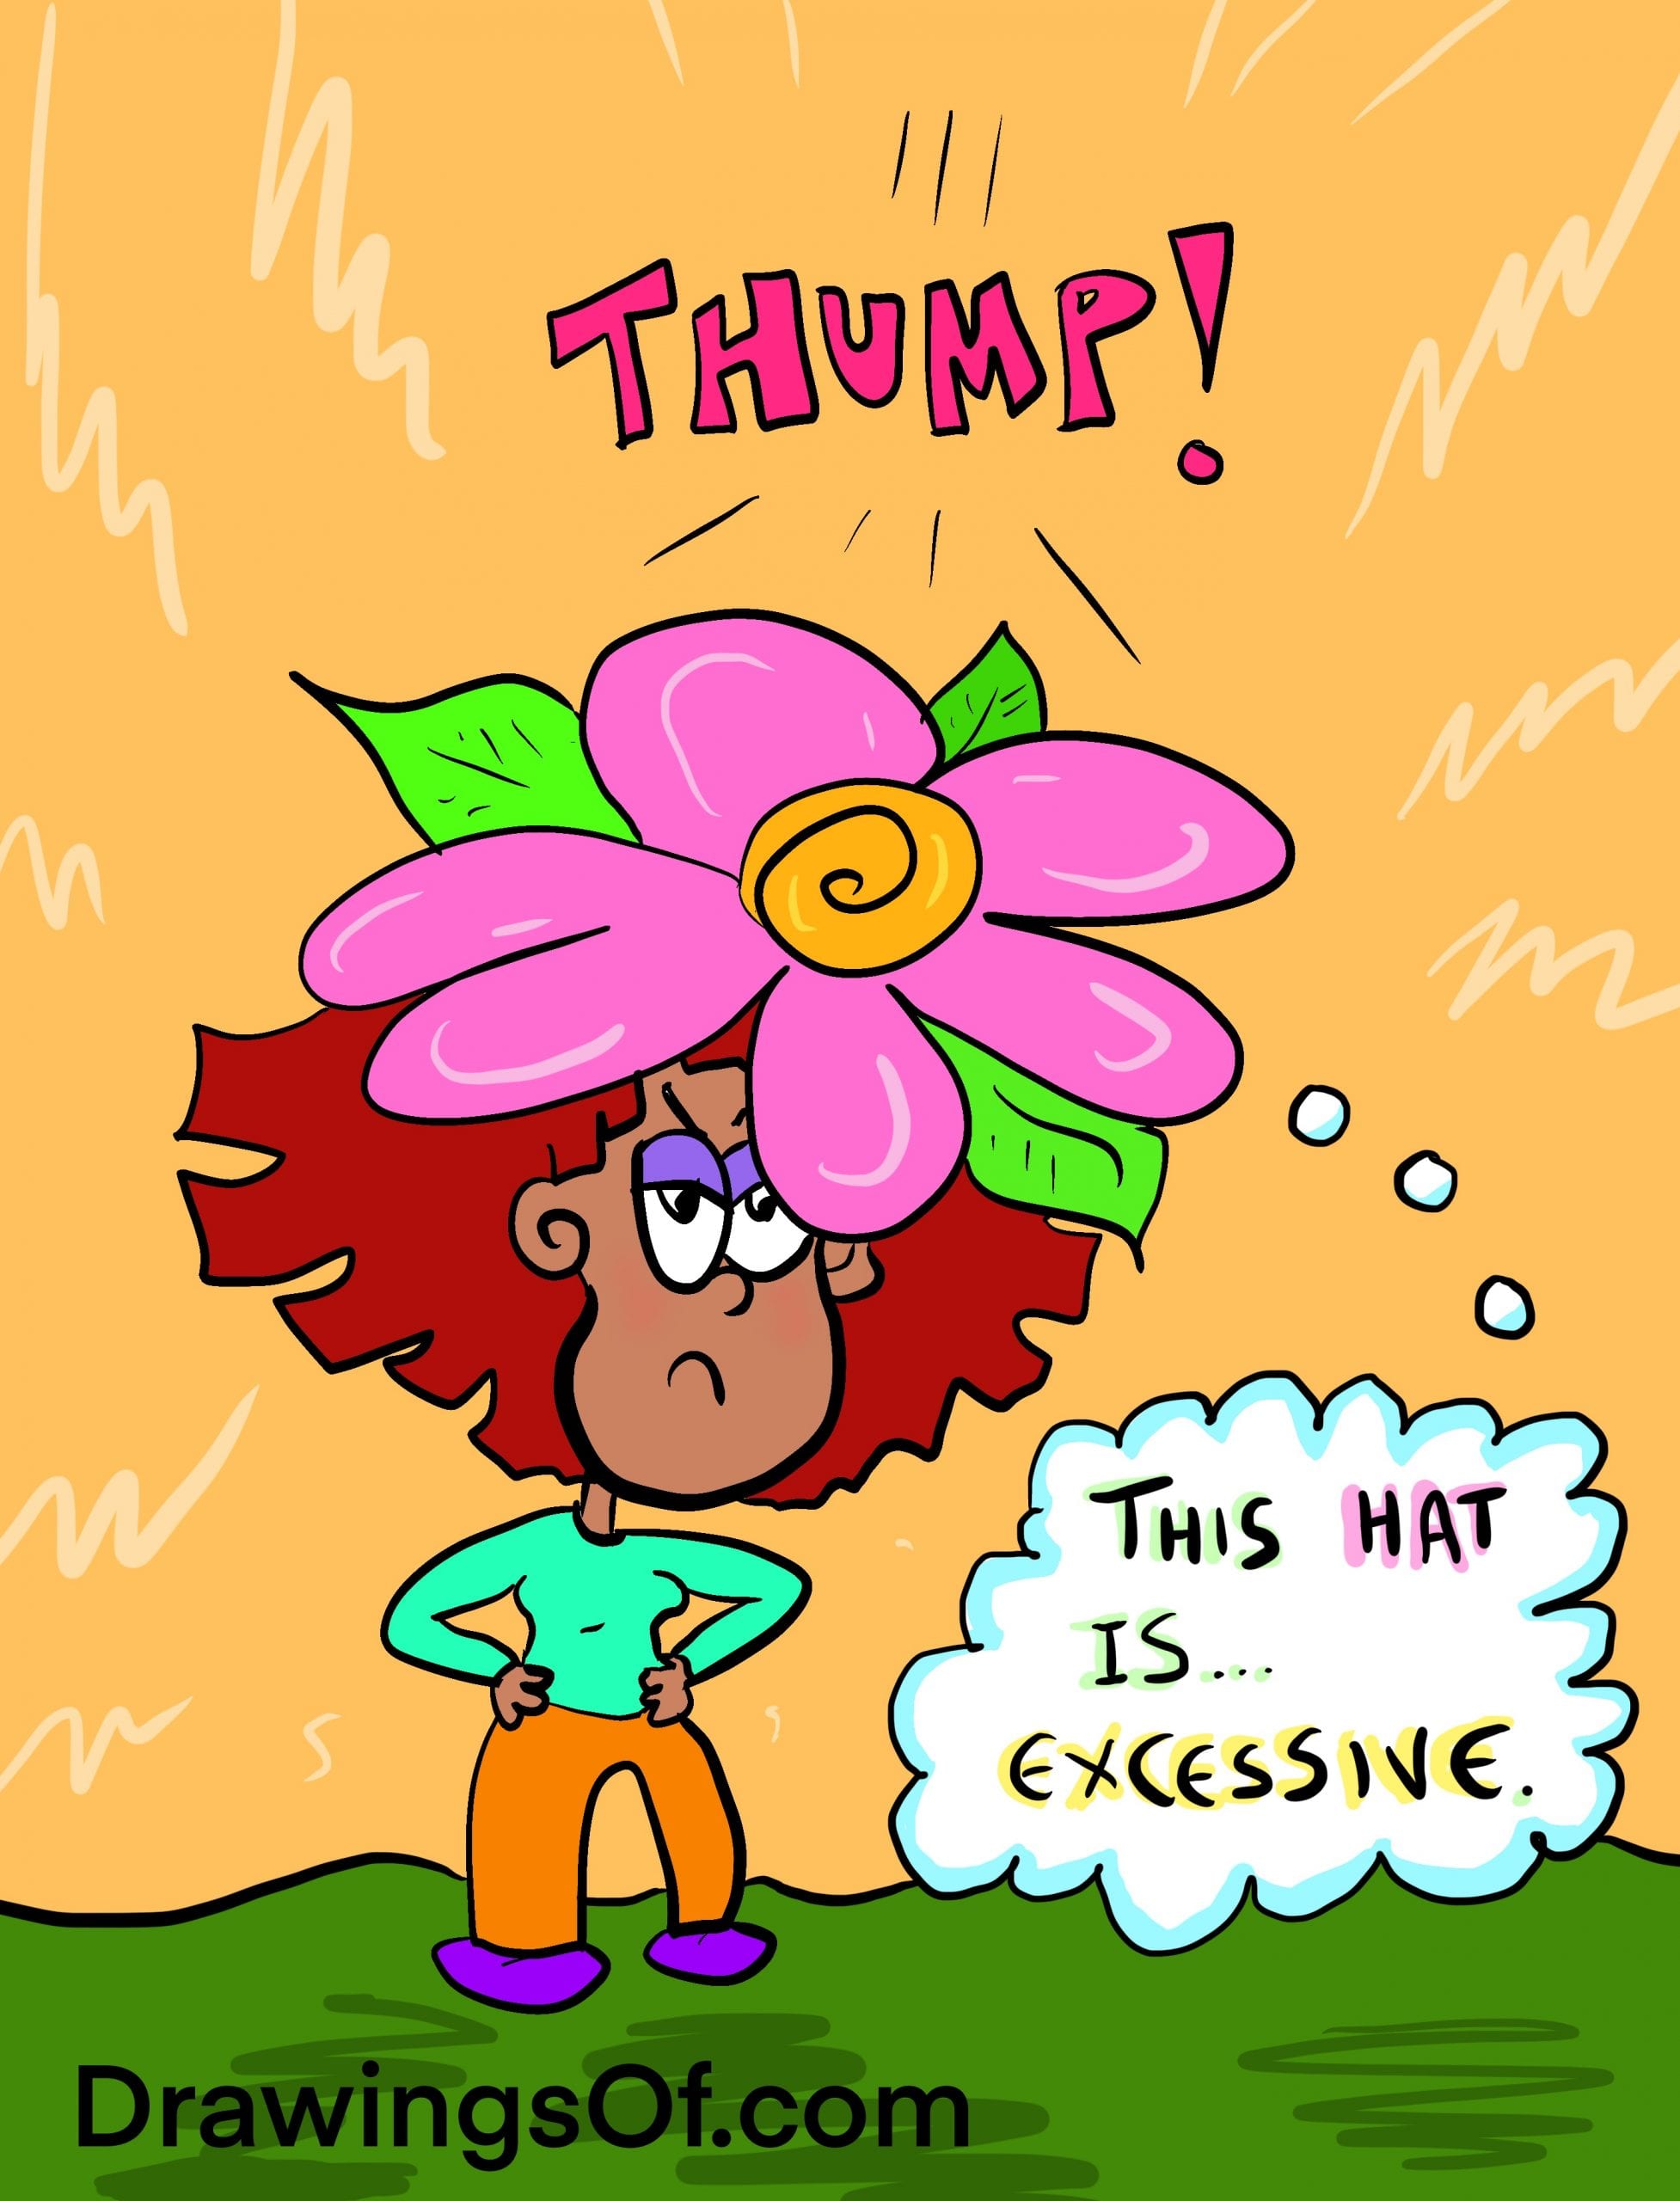 Cartoon of angry person with giant flower hat on head.